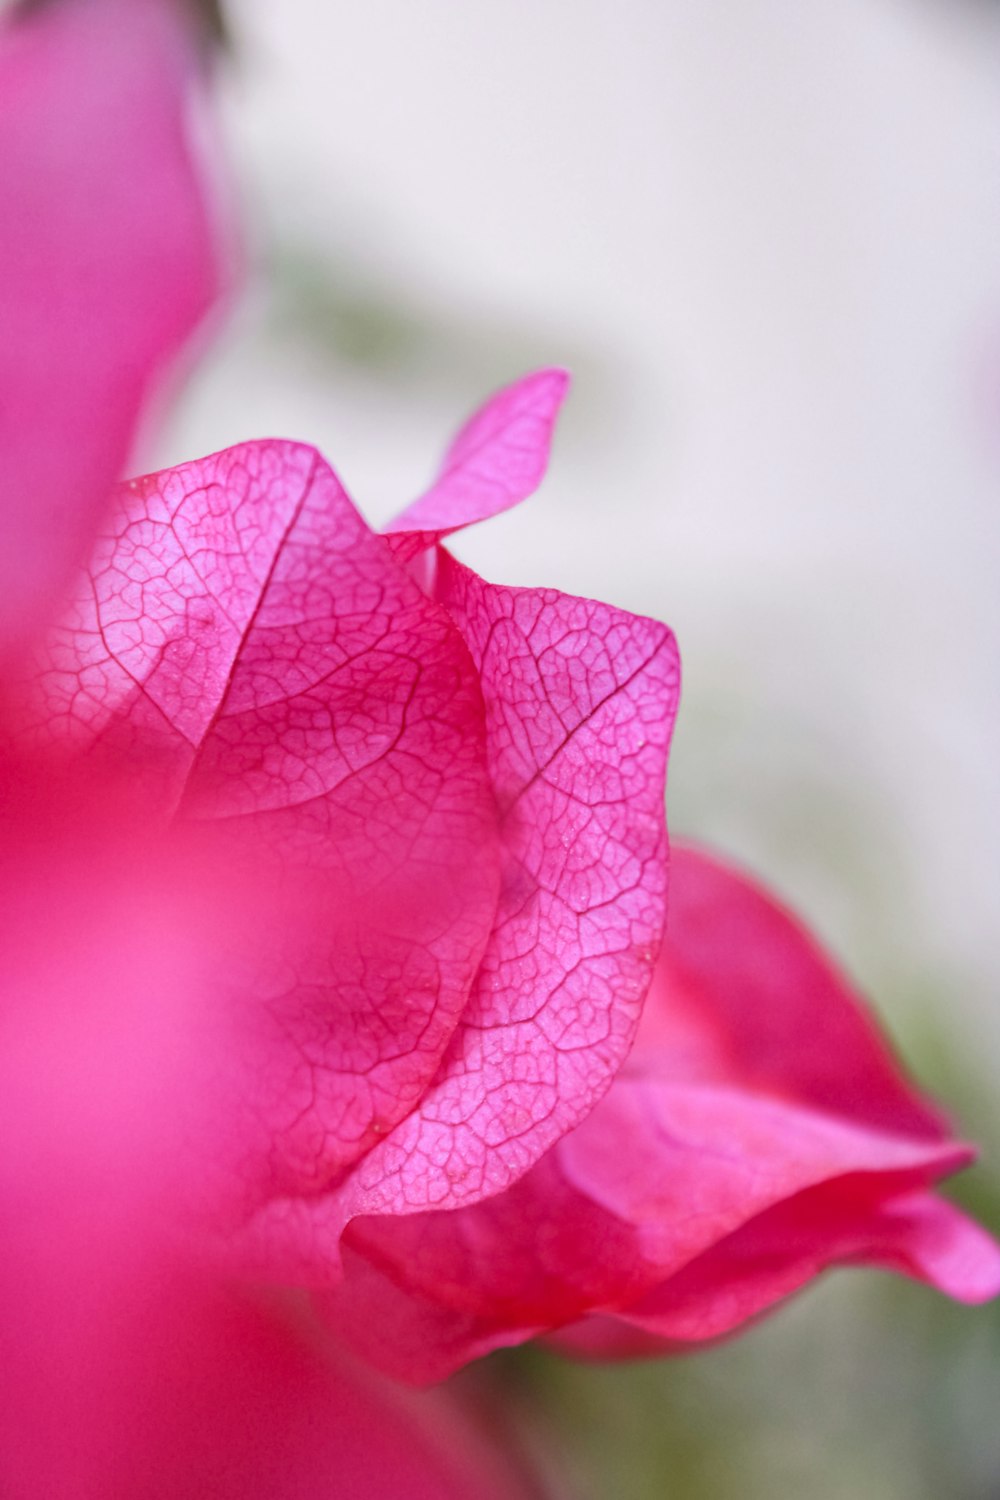 a close up of a pink flower with a blurry background